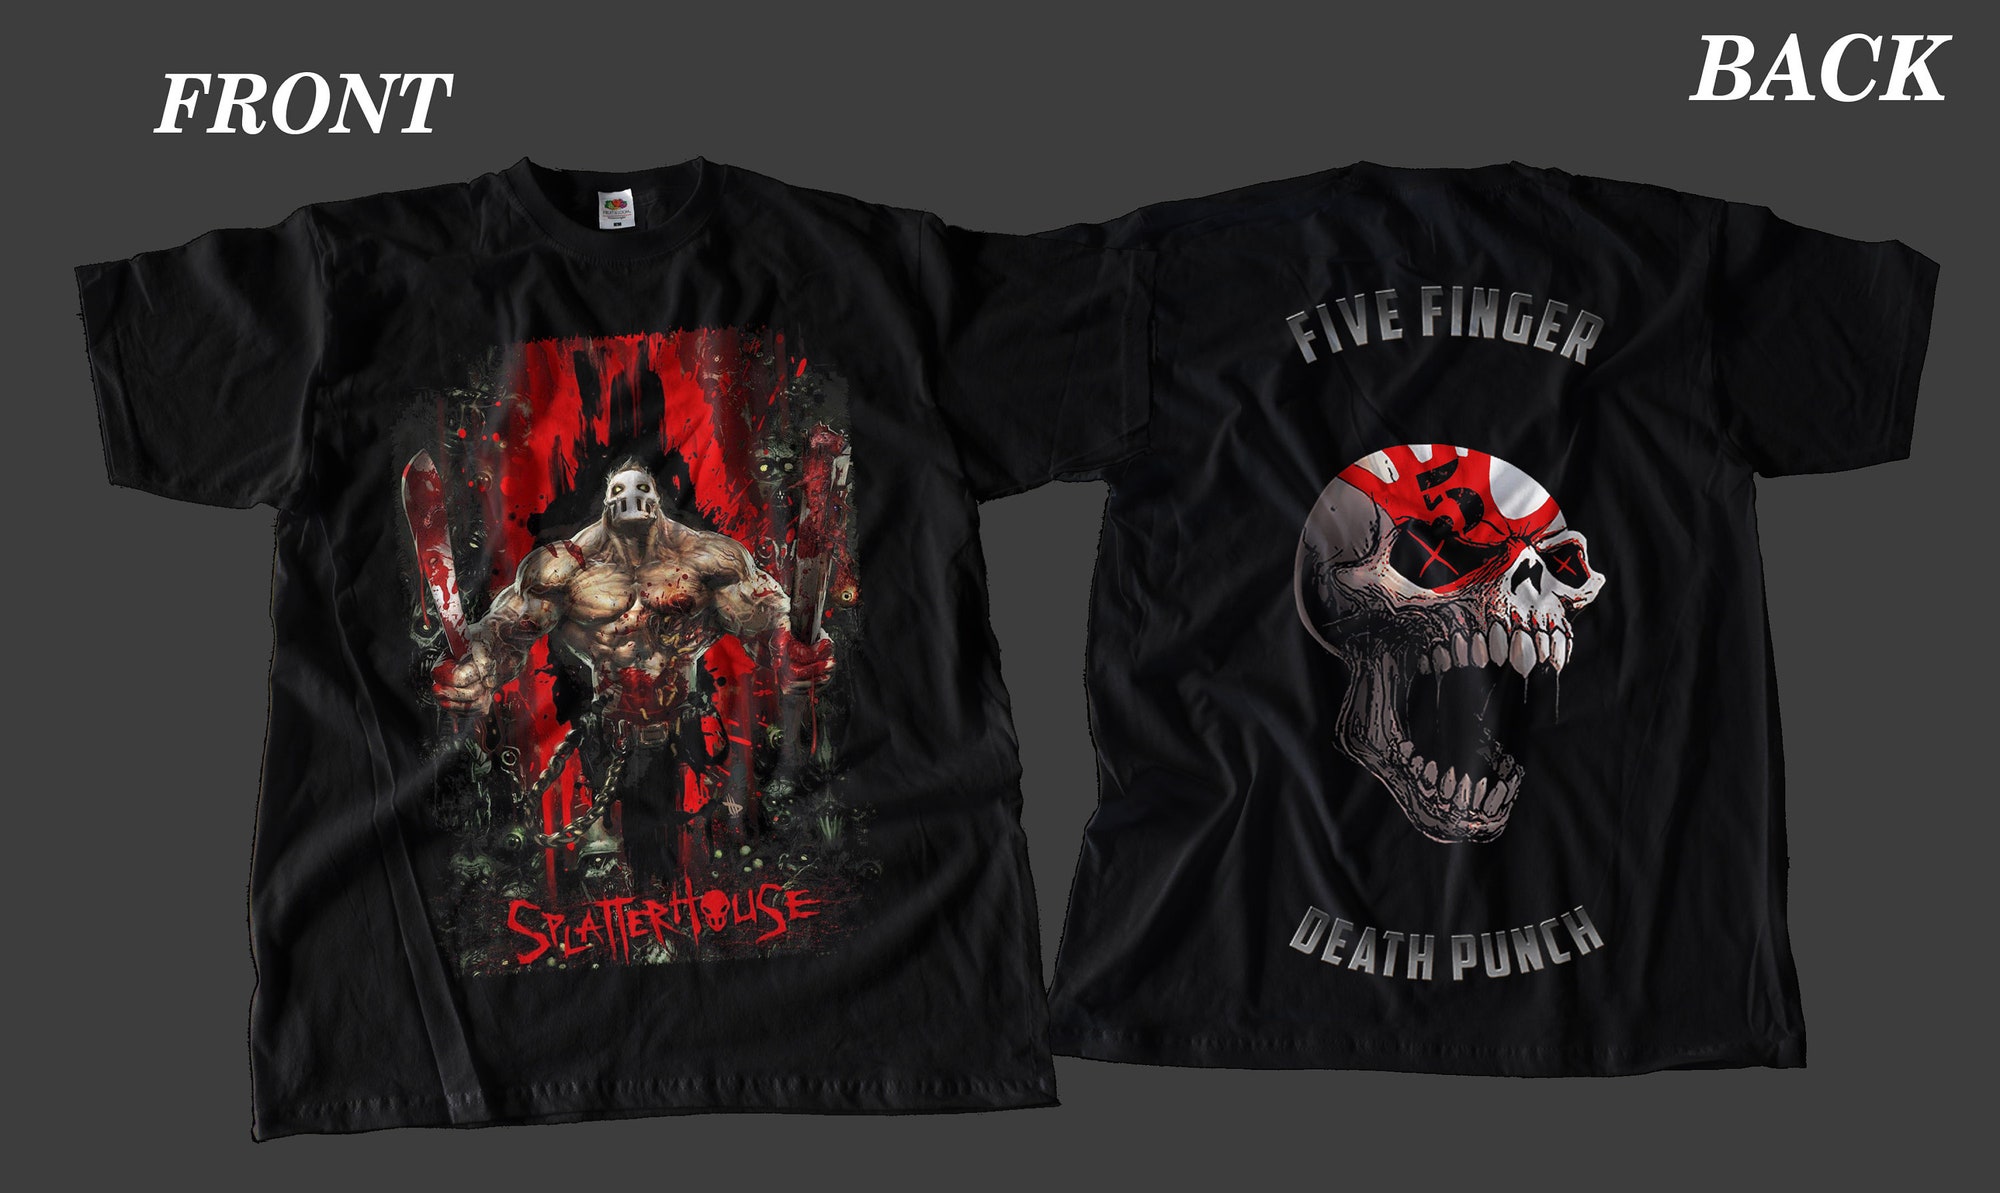 Five Finger Death Punch tee